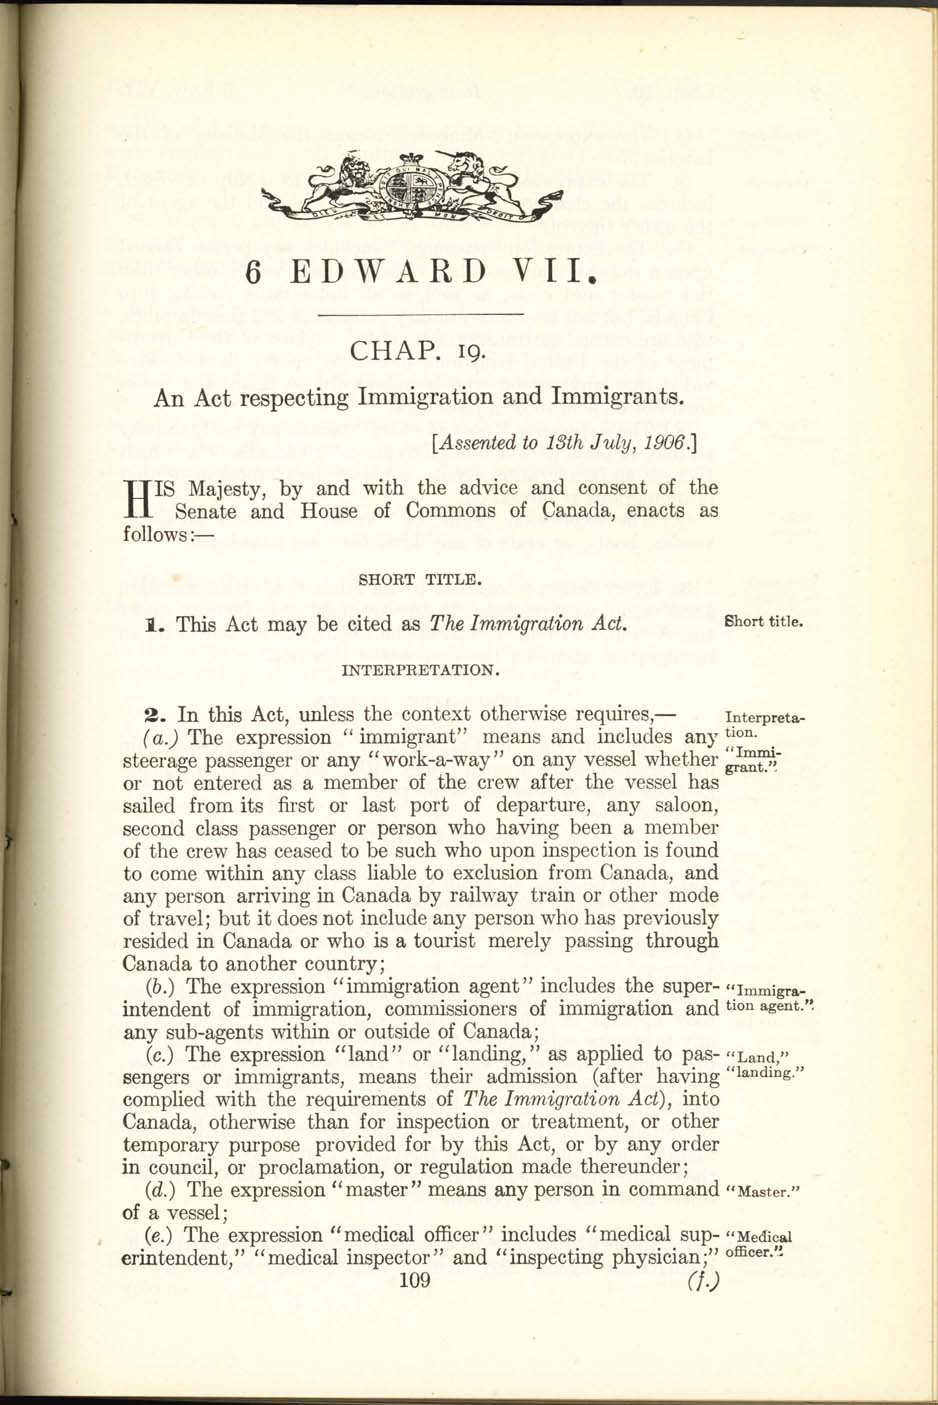 Chap. 19 Page 109 Immigration Act, 1906